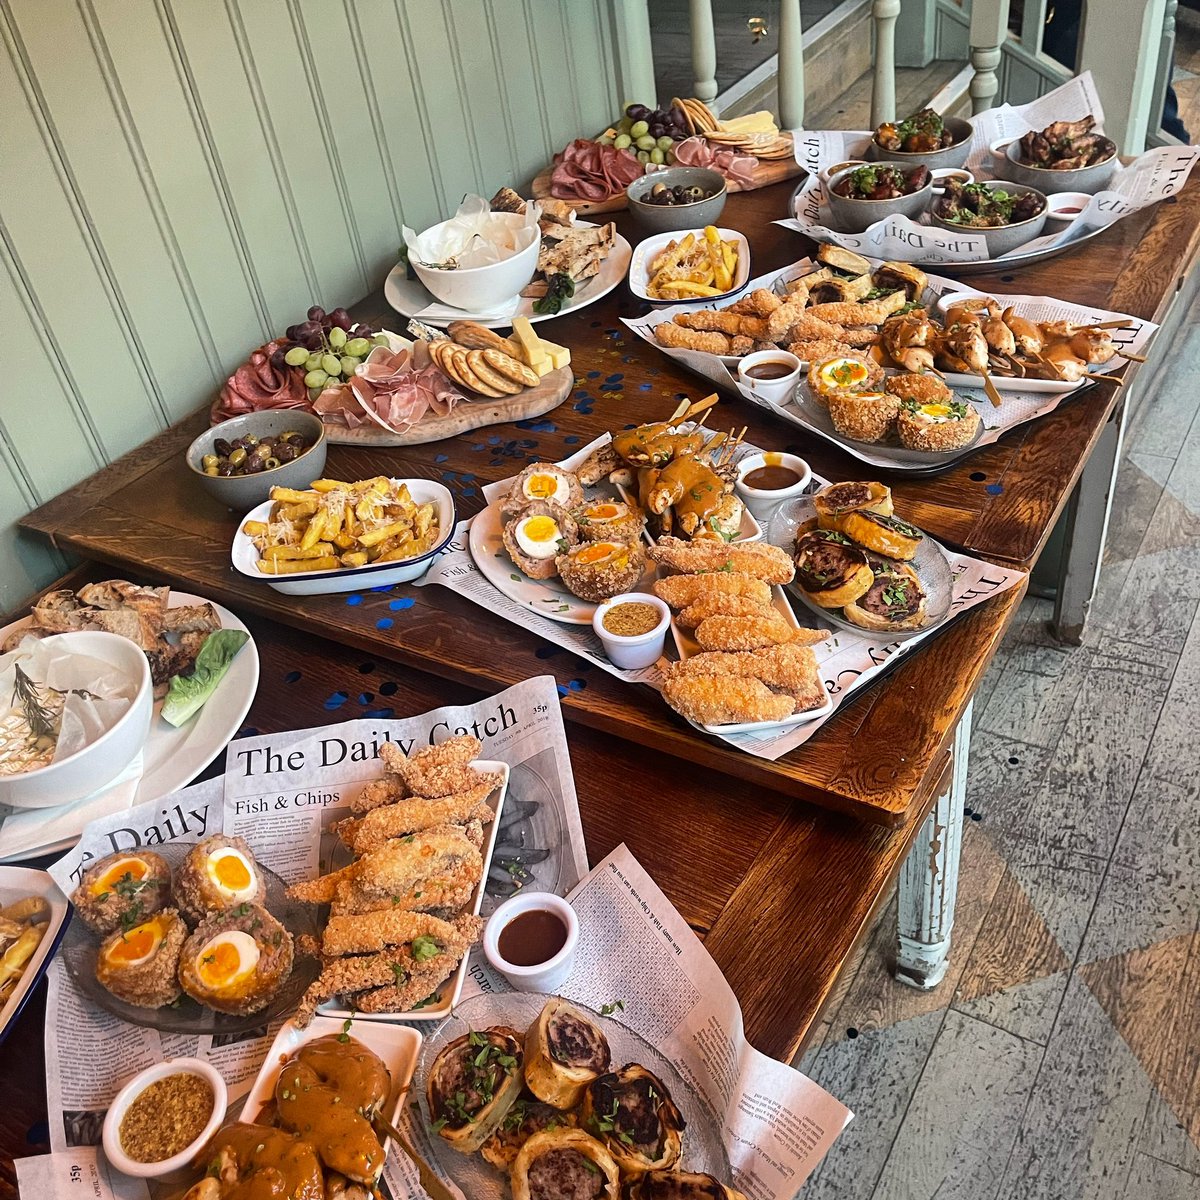 Party party party 🎉 looking for perfect private hire? Look no further! Enquire online or pop in to speak to our events team 🤩 #privatehire #privateevents #pubfunctionroom #pubevents #fingerfood #canapé #partytime